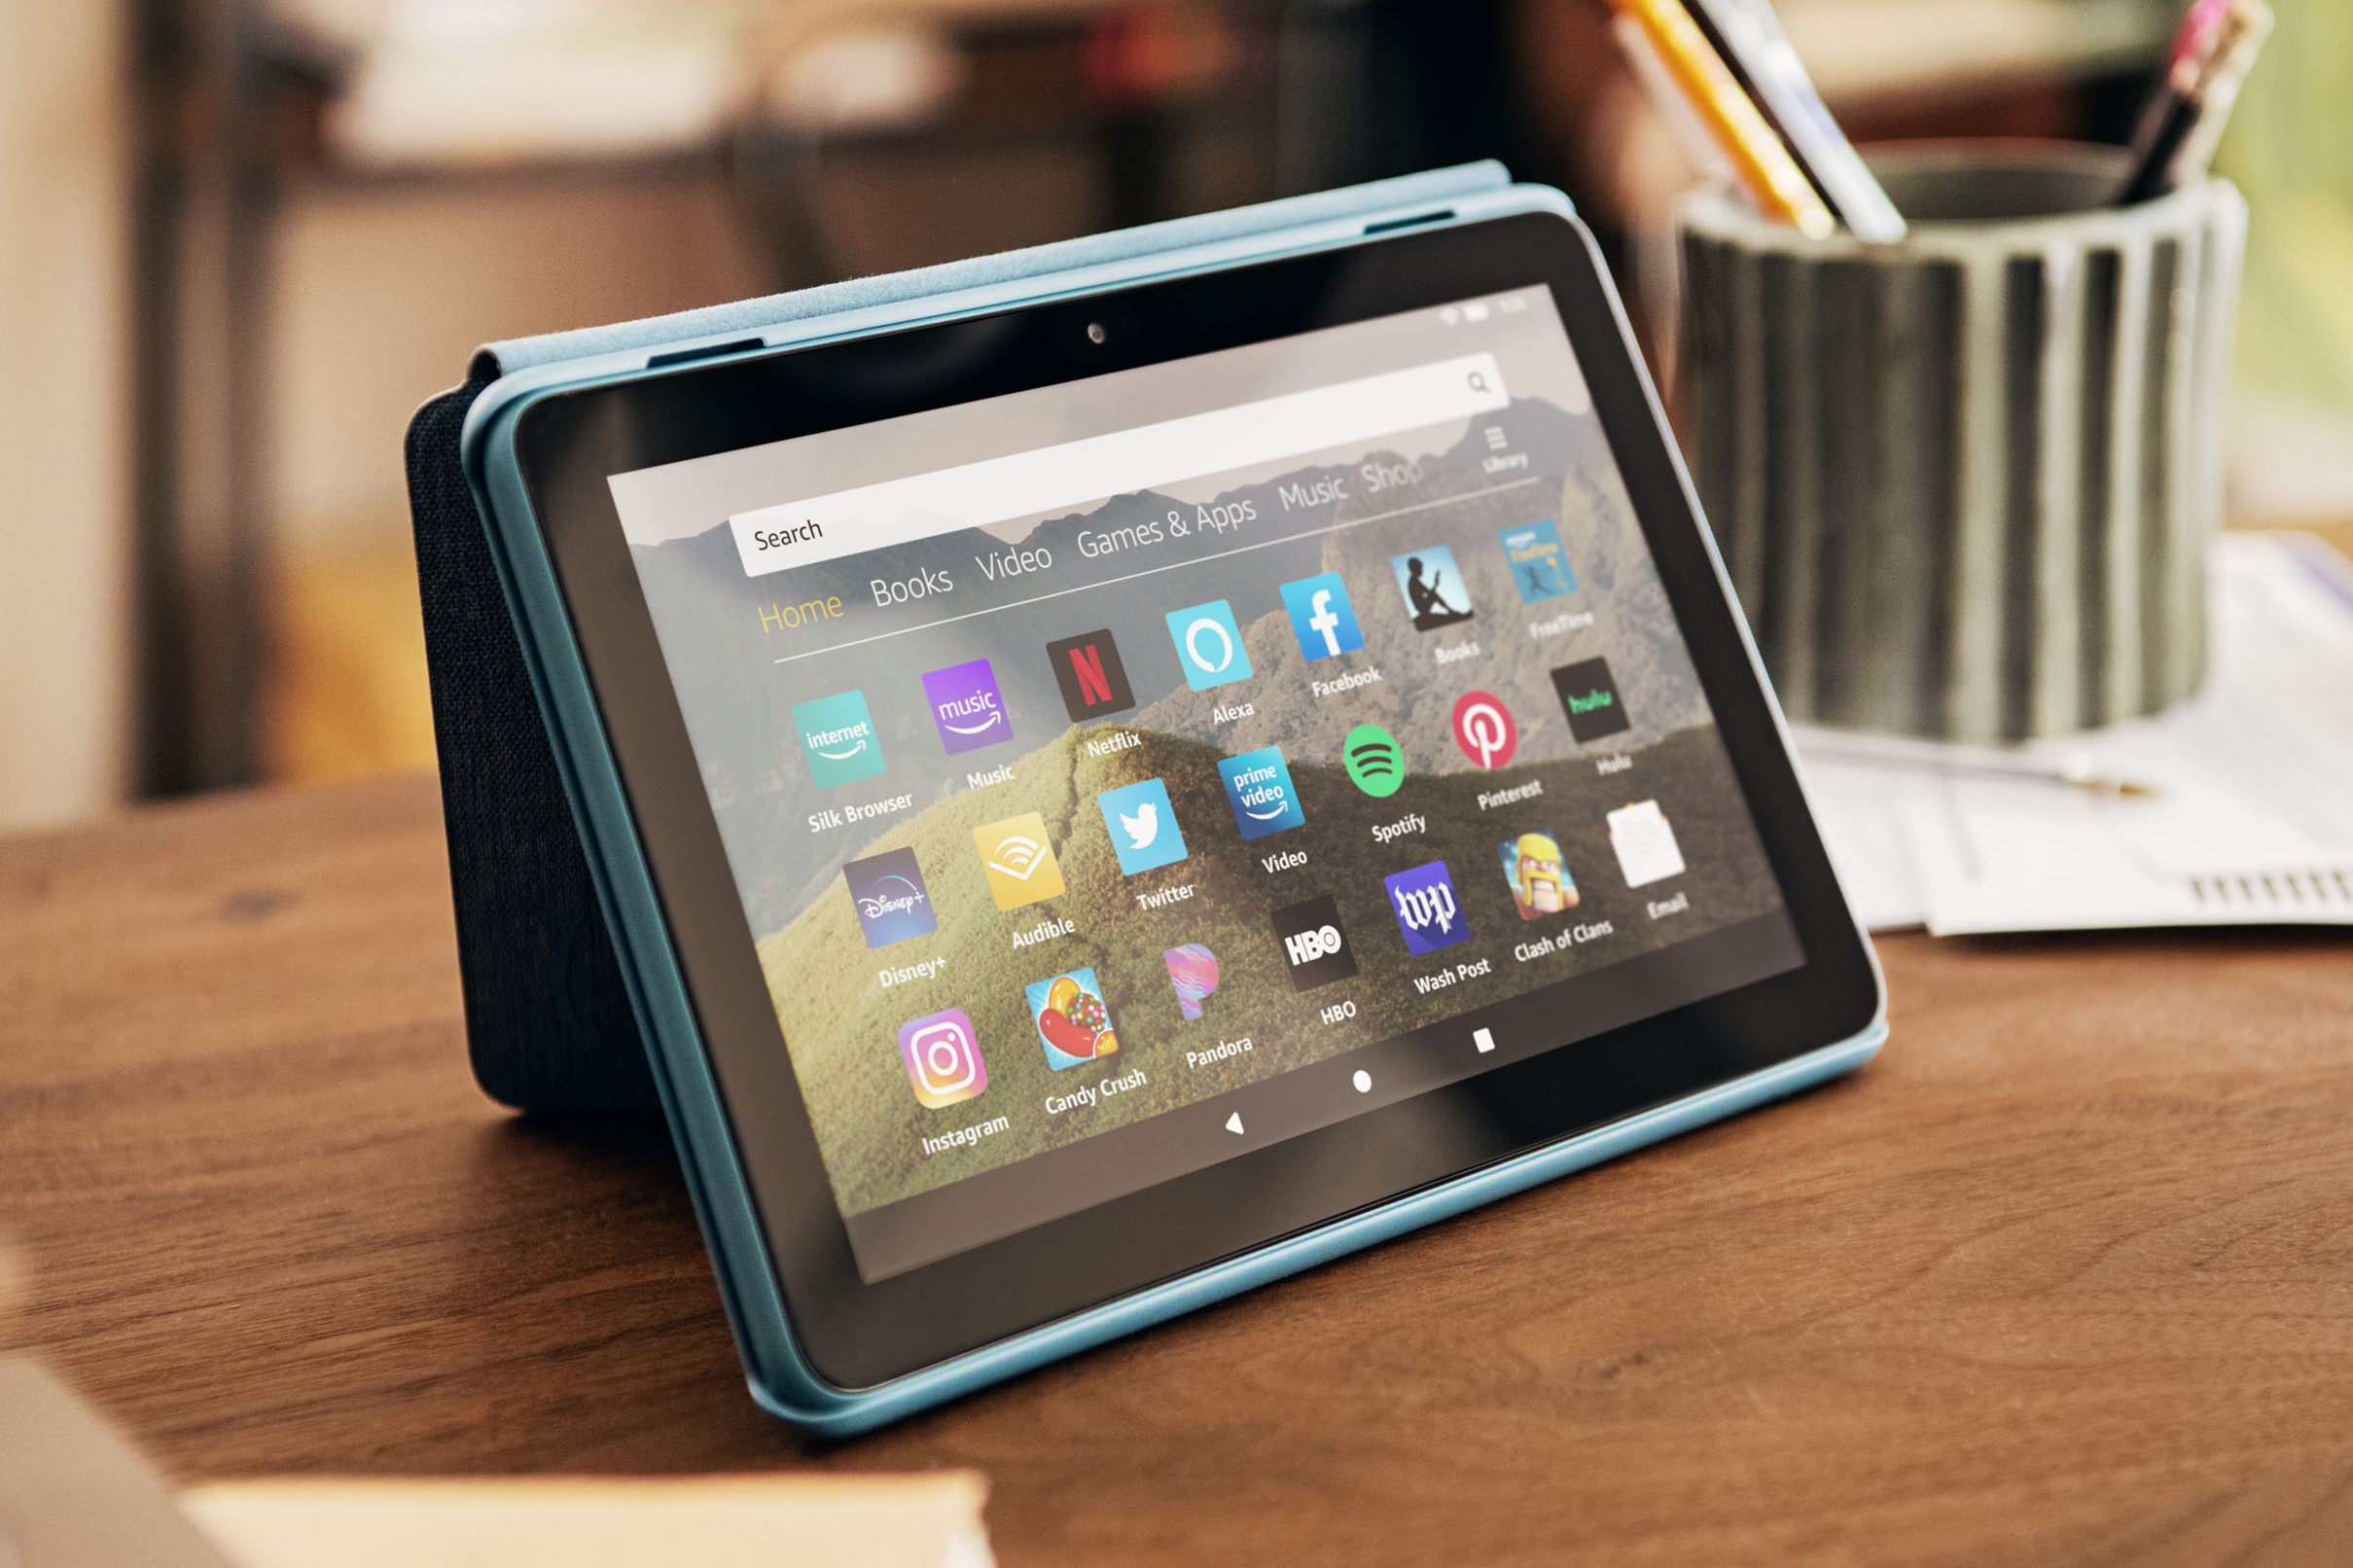 Fire HD 10 review: more personal TV than personal computer